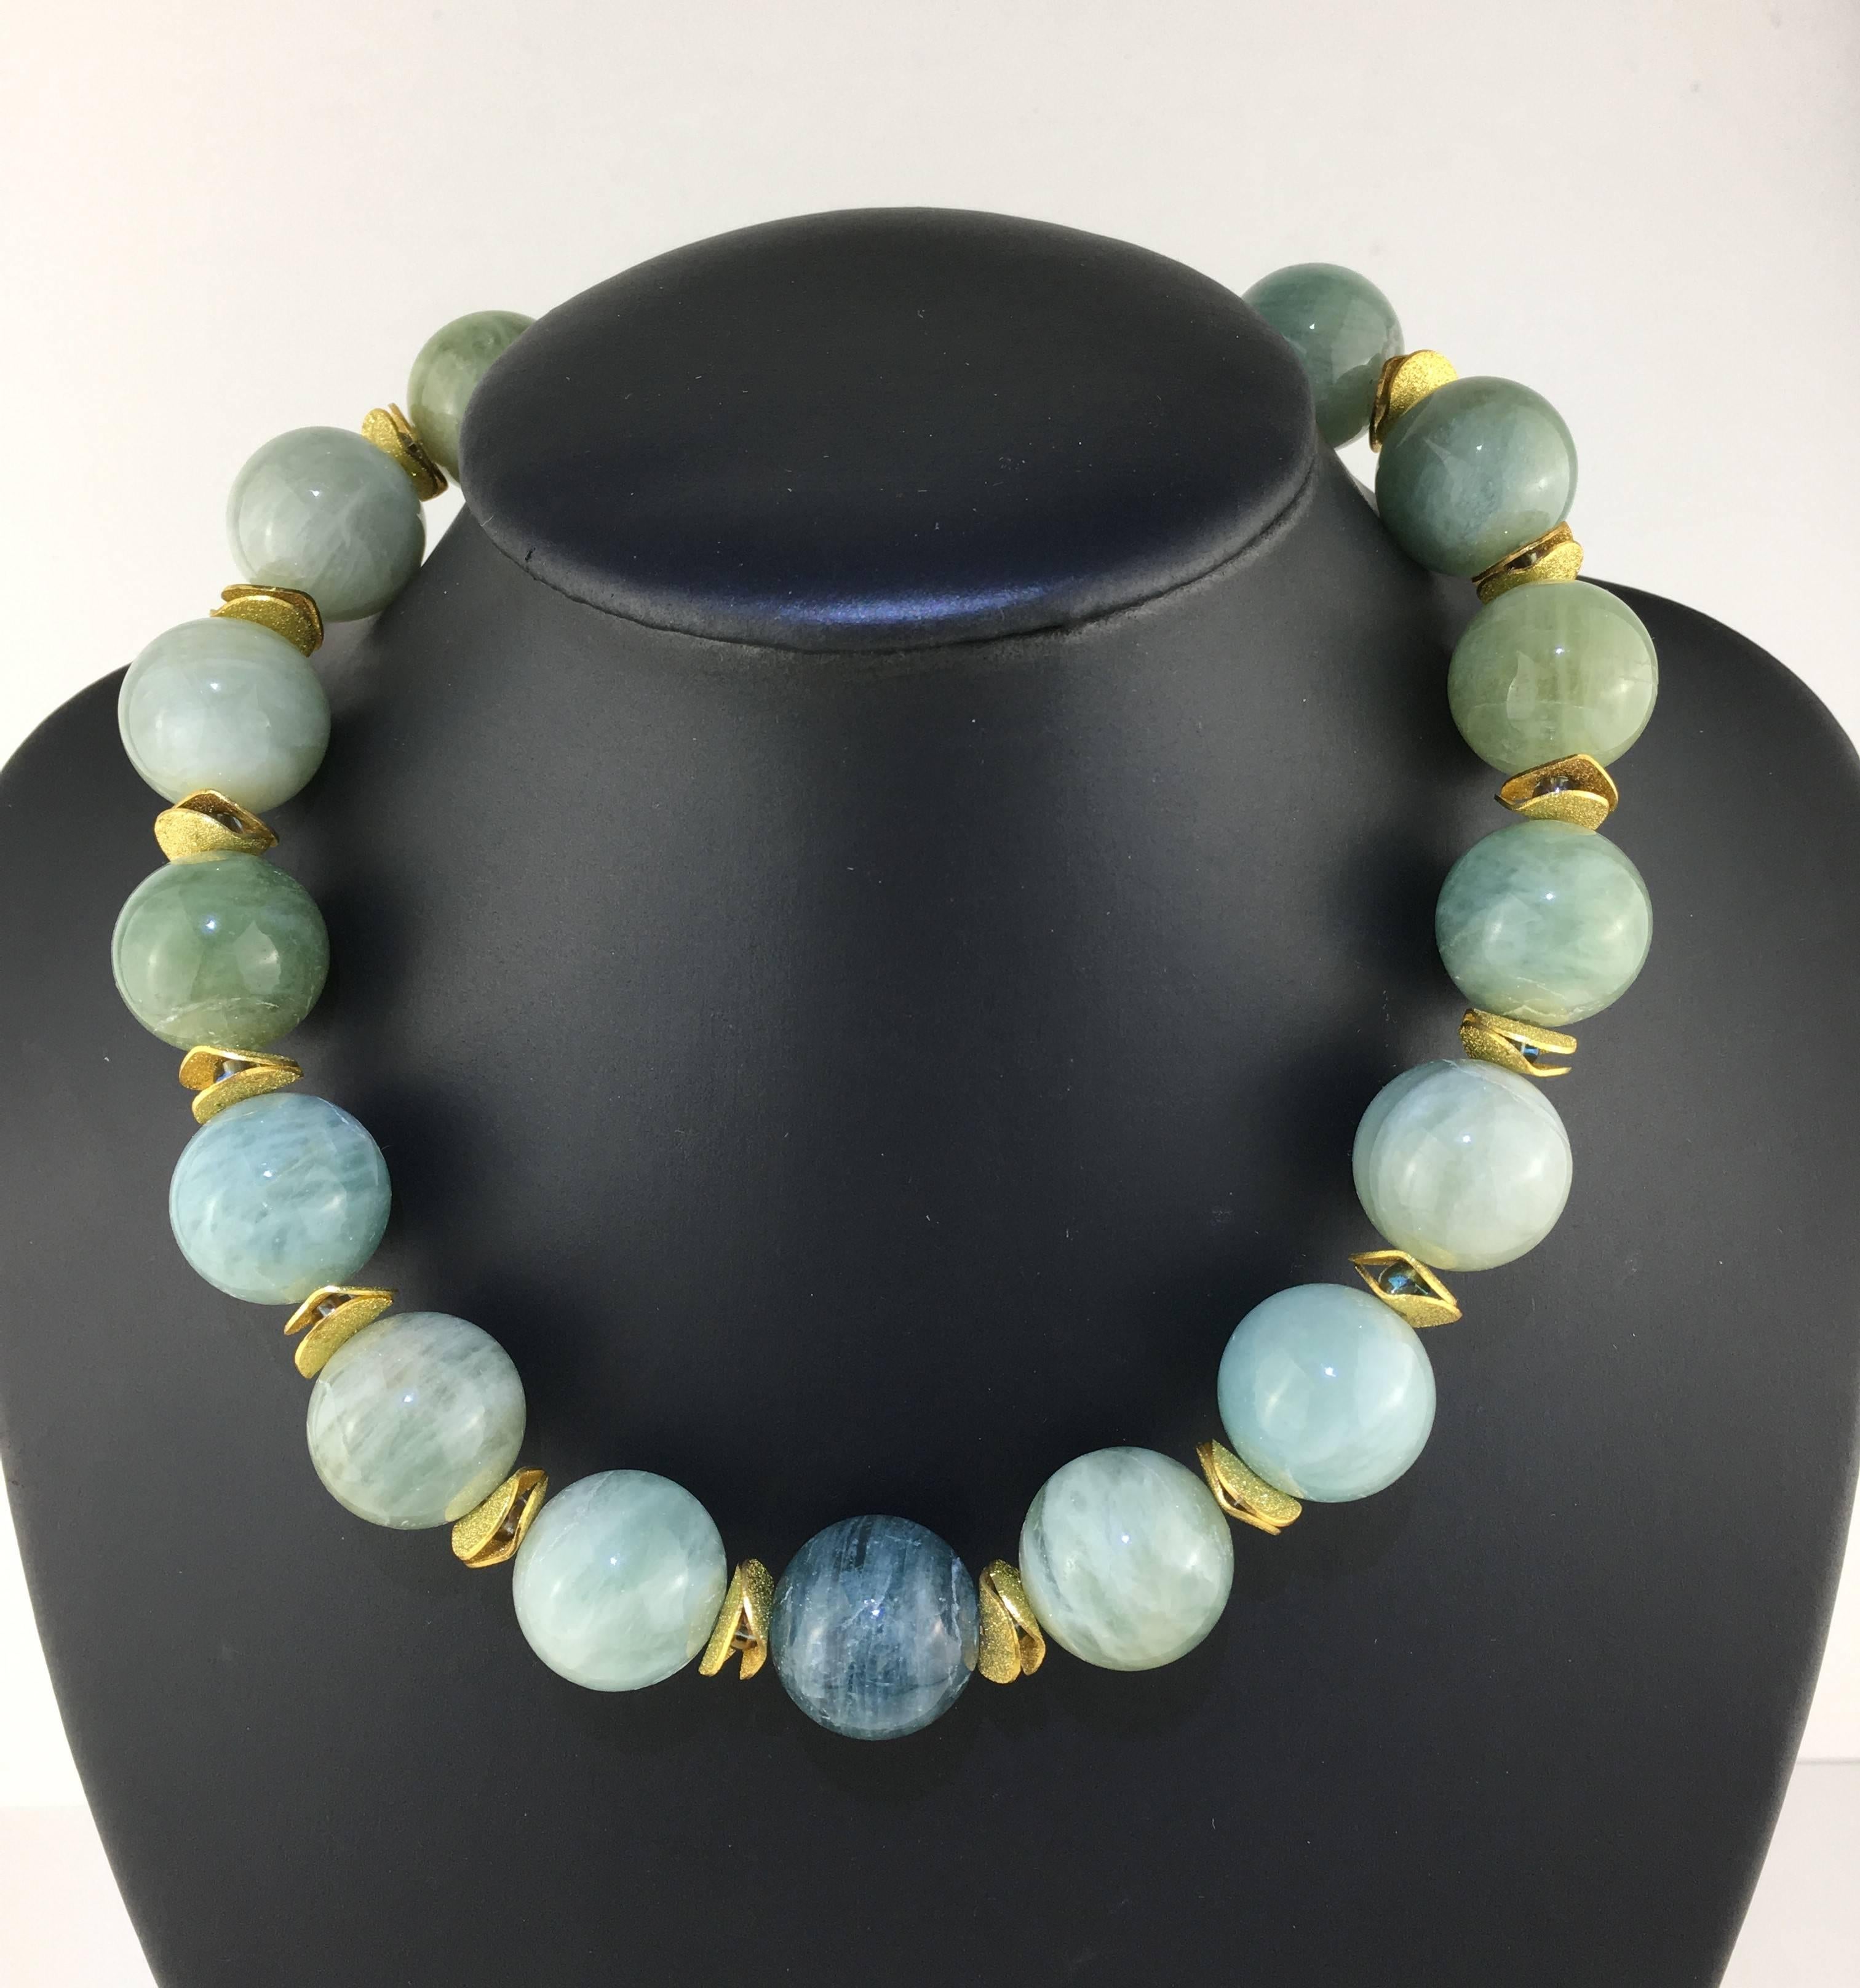 Artisan Glowing, Large Spheres of Polished Opaque Aquamarine Choker  March Birthstone